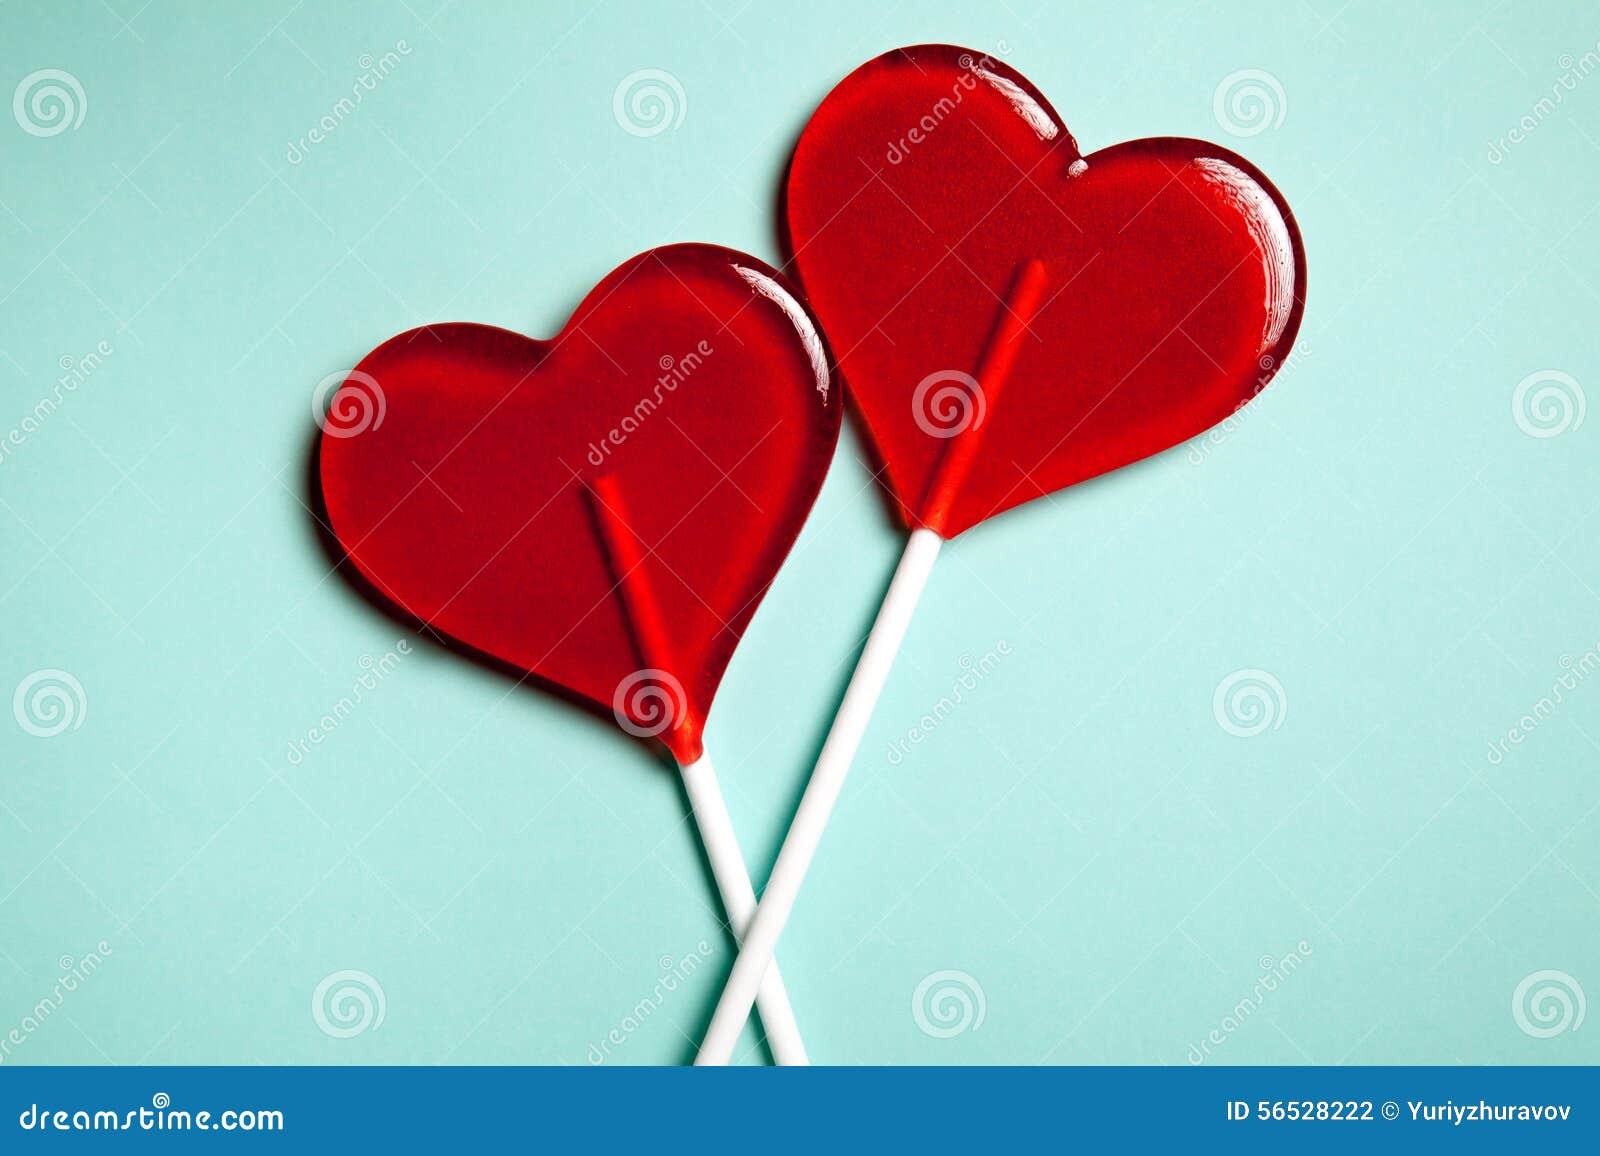 two-lollipops-red-hearts-candy-love-conc